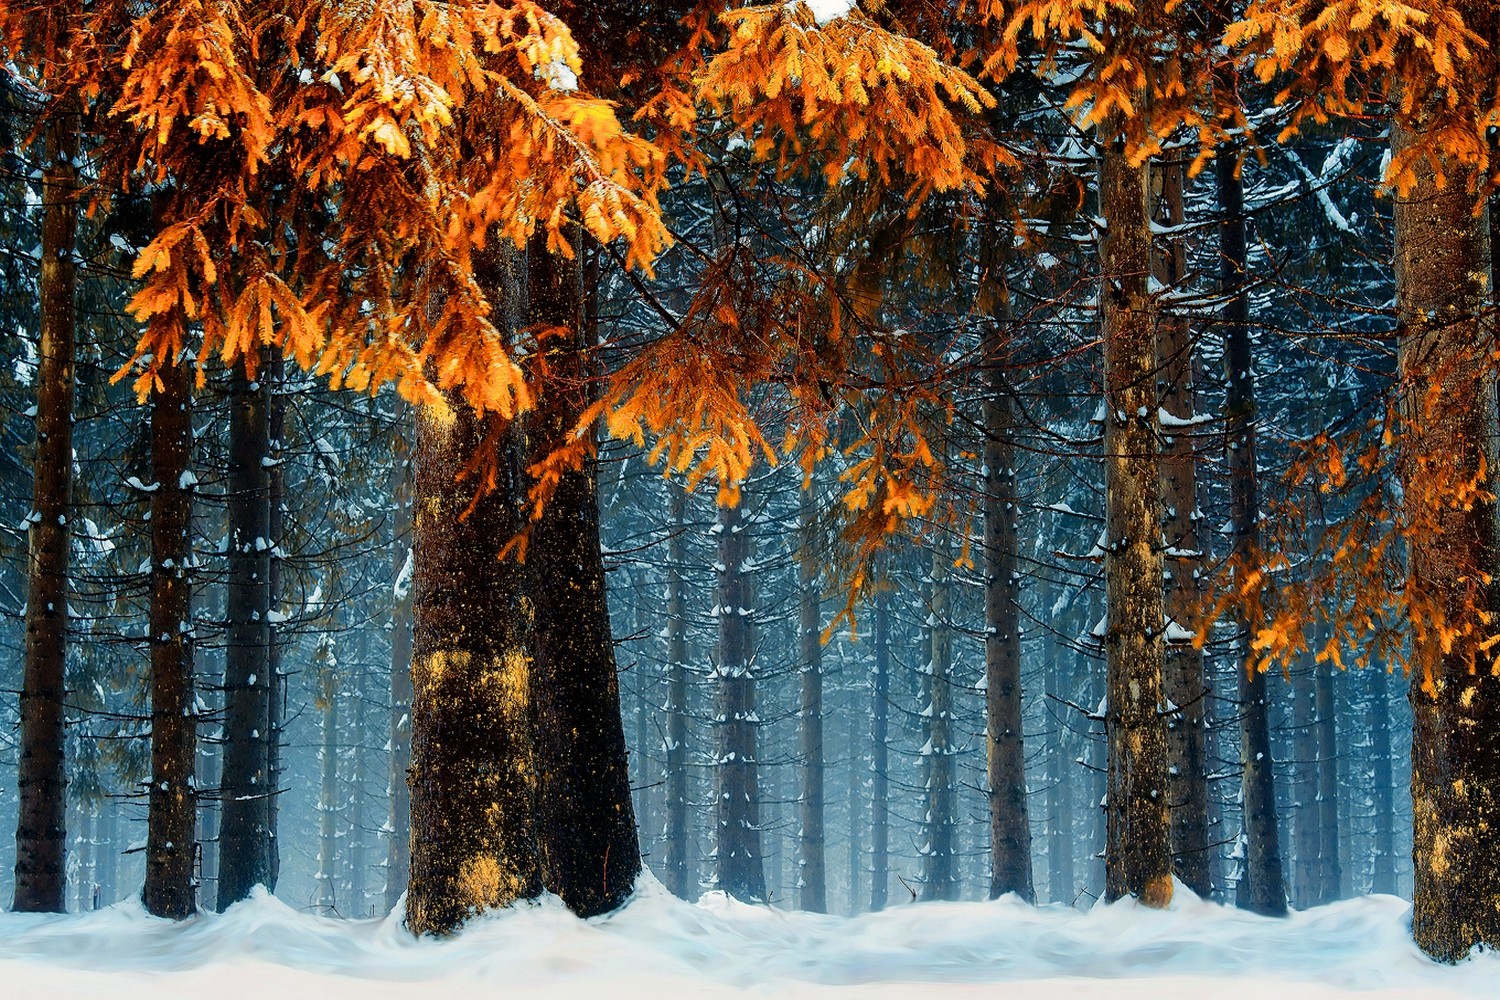 General 1500x1000 snow forest cold orange Germany nature landscape trees blue leaves winter white outdoors